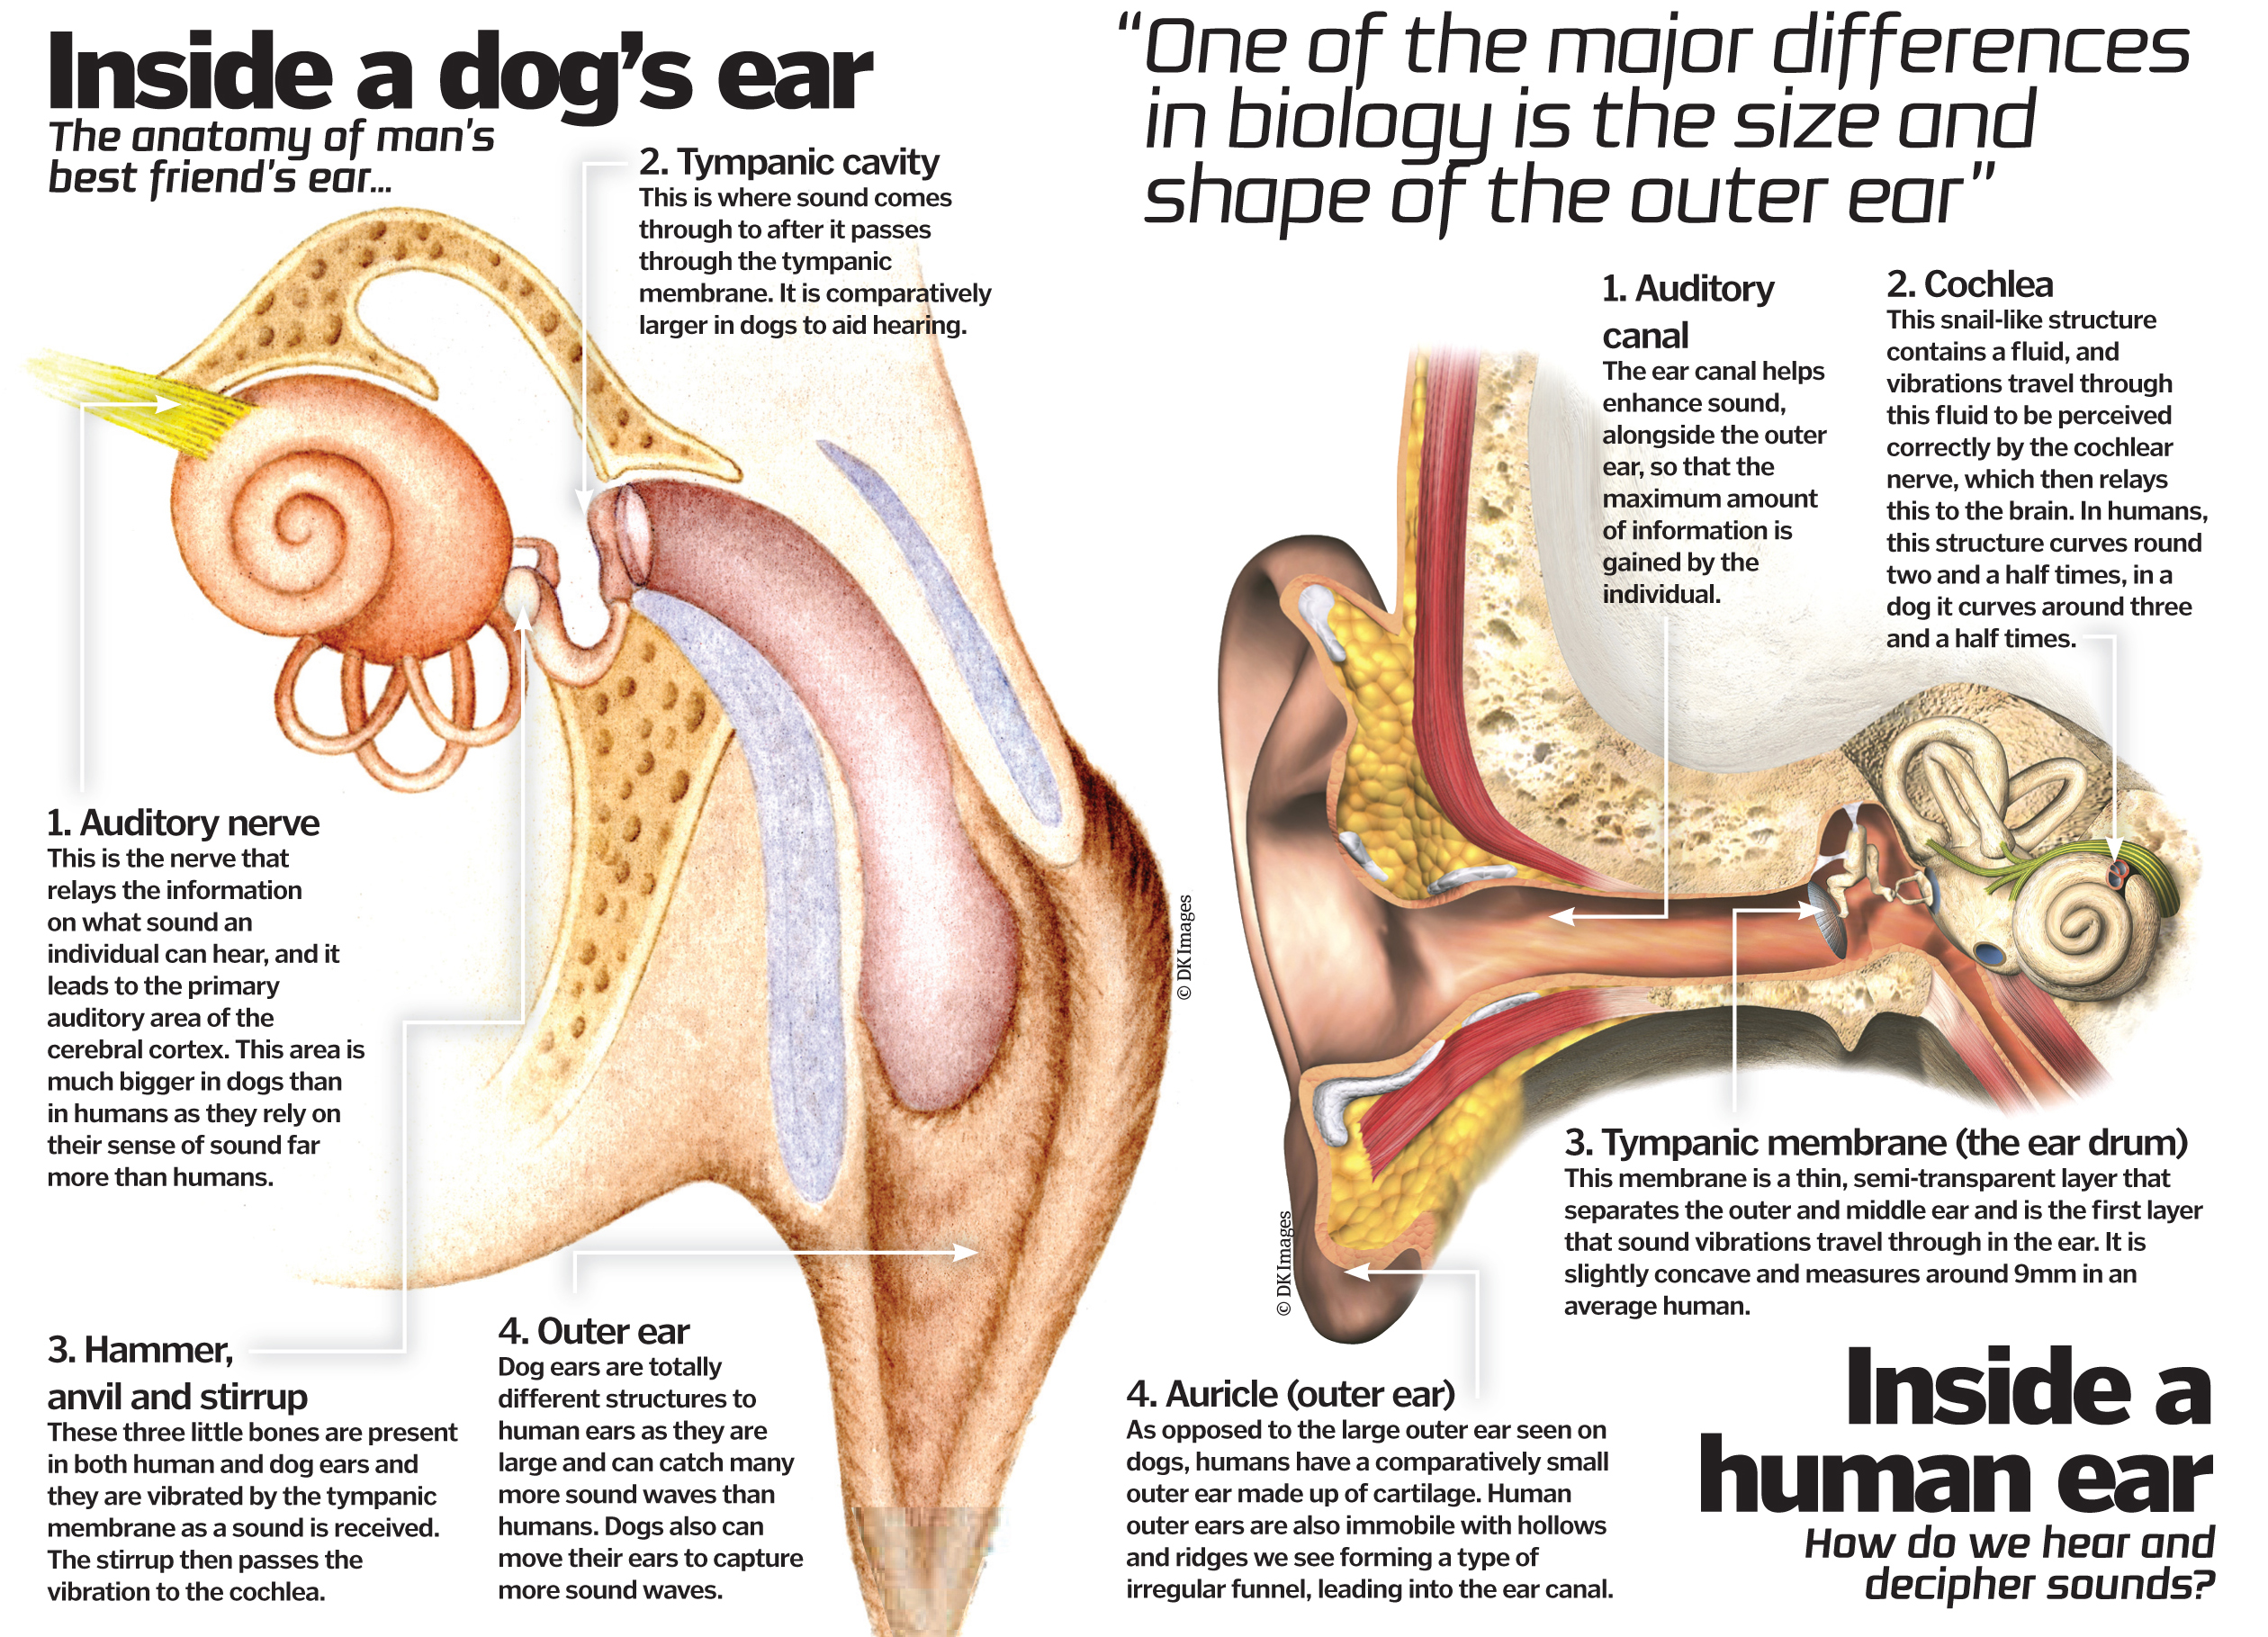 Are dogs better at hearing than humans?